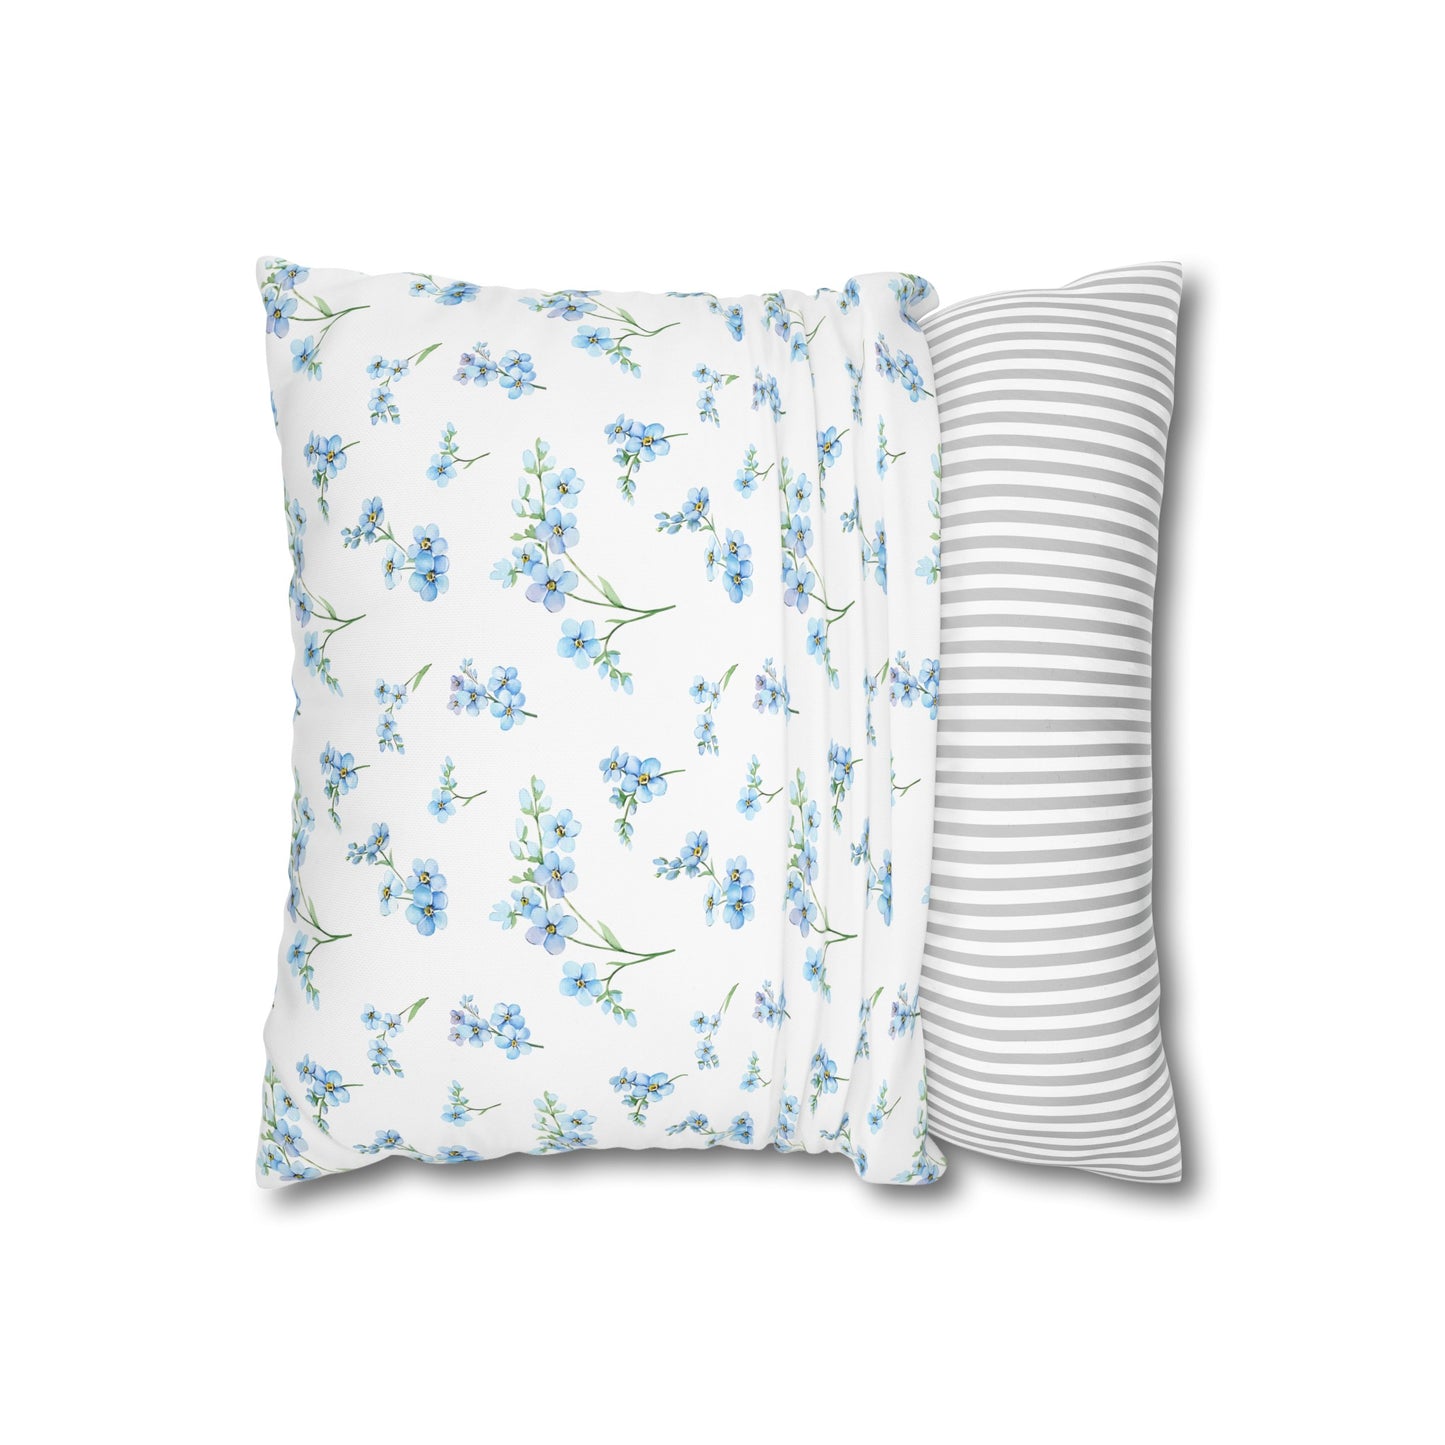 Forget-Me-Not #3 Cushion Cover